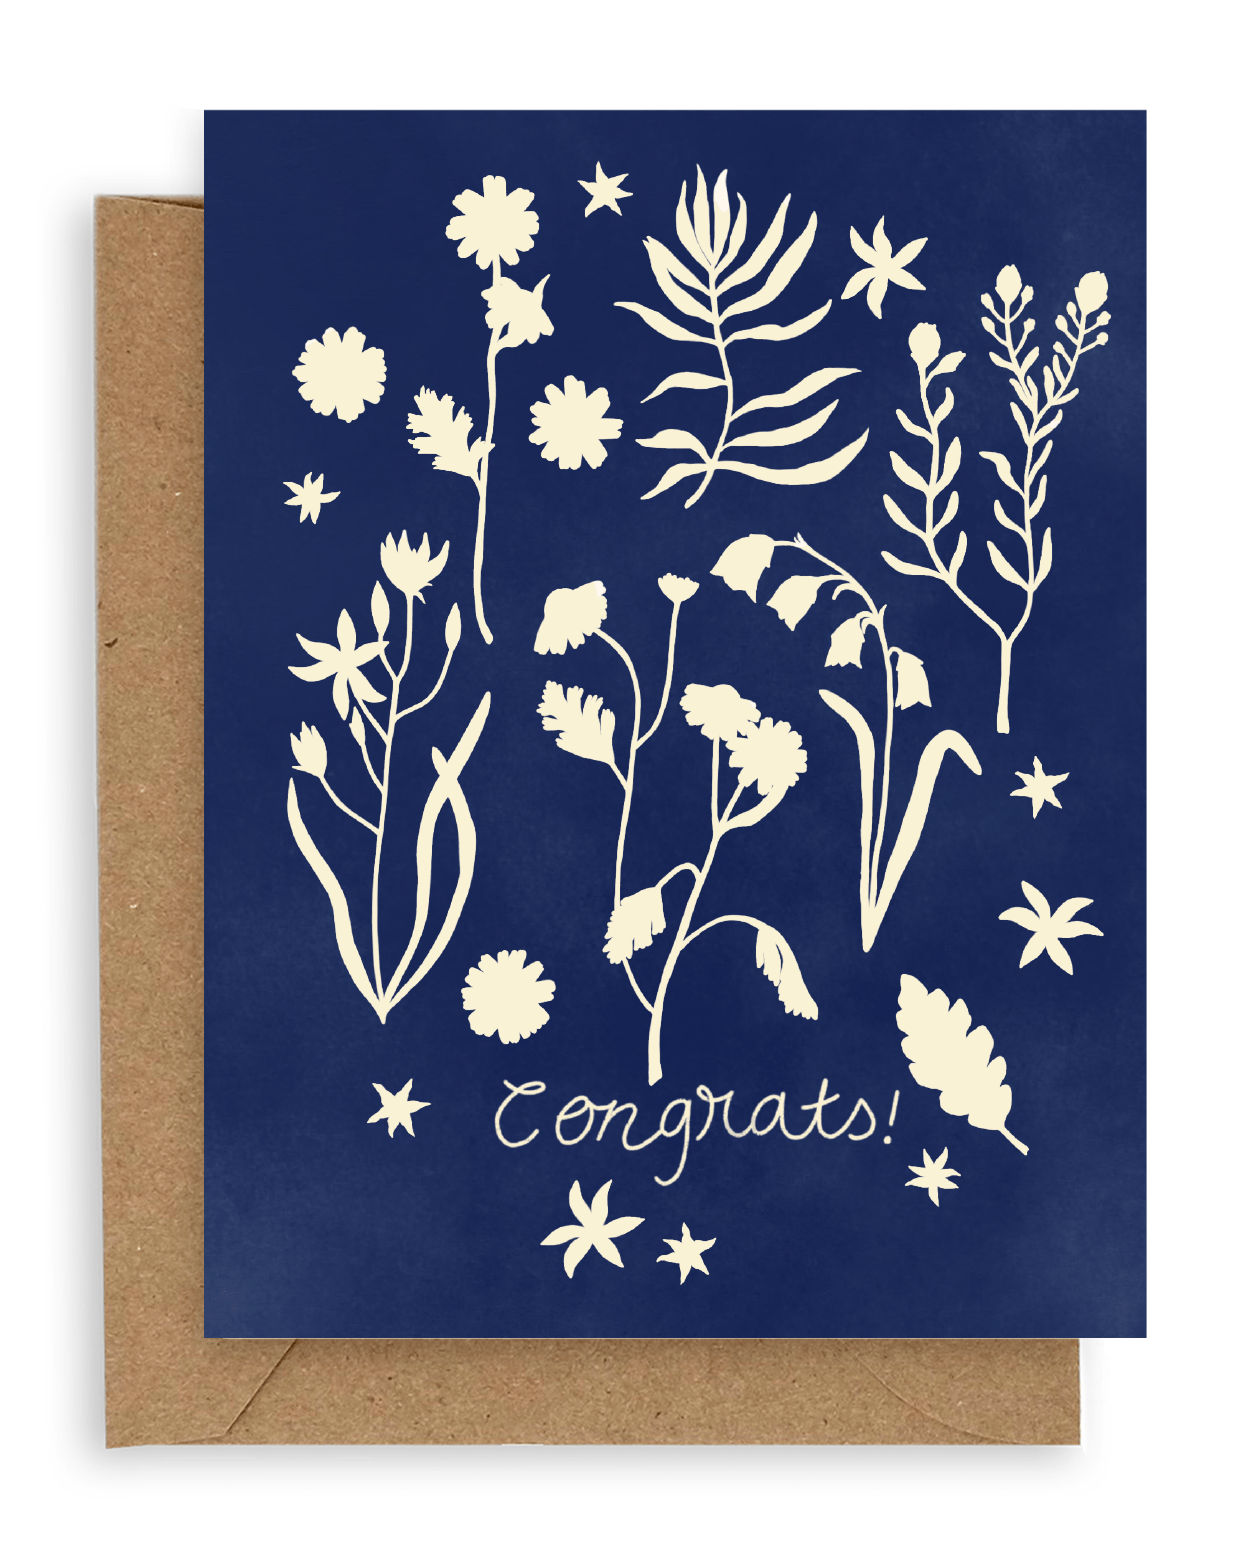 White-out forest flowers arranged around the word "congrats!" printed on a navy blue background. Shown with kraft envelope.